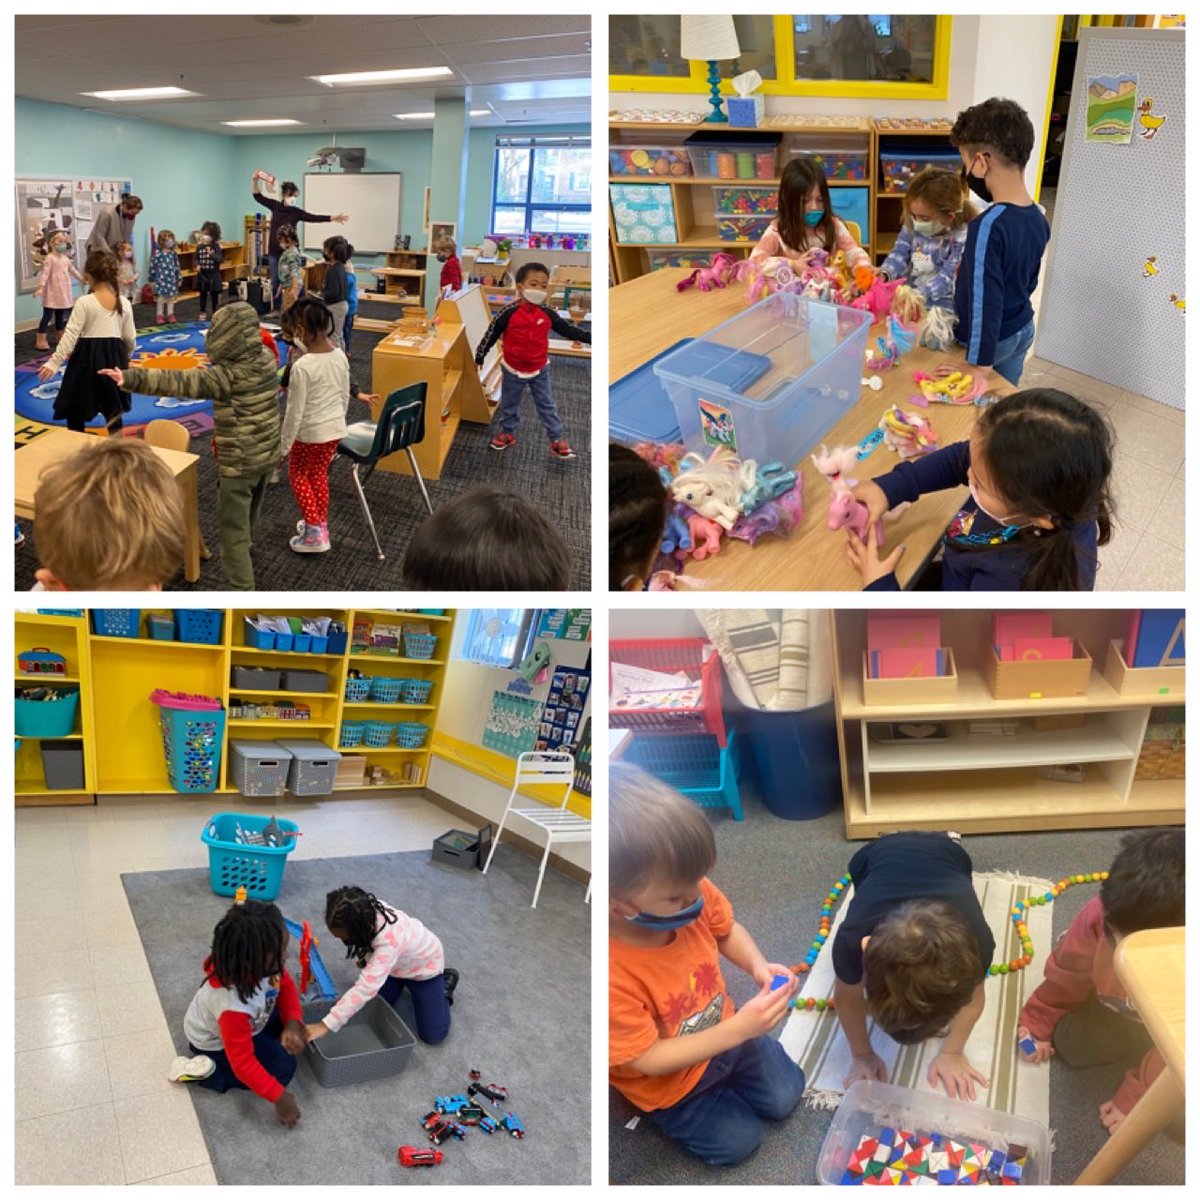 A great week supporting our PK students ⁦<a target='_blank' href='http://twitter.com/MPSArlington'>@MPSArlington</a>⁩ ⁦<a target='_blank' href='http://twitter.com/Innovation_APS'>@Innovation_APS</a>⁩ ⁦<a target='_blank' href='http://twitter.com/OakridgeConnect'>@OakridgeConnect</a>⁩ Welcome Back PK! ⁦<a target='_blank' href='http://twitter.com/APSVirginia'>@APSVirginia</a>⁩ ⁦<a target='_blank' href='http://twitter.com/APSArts'>@APSArts</a>⁩ ⁦<a target='_blank' href='http://twitter.com/APSVaSchoolBd'>@APSVaSchoolBd</a>⁩ <a target='_blank' href='https://t.co/wg7LvieGga'>https://t.co/wg7LvieGga</a>